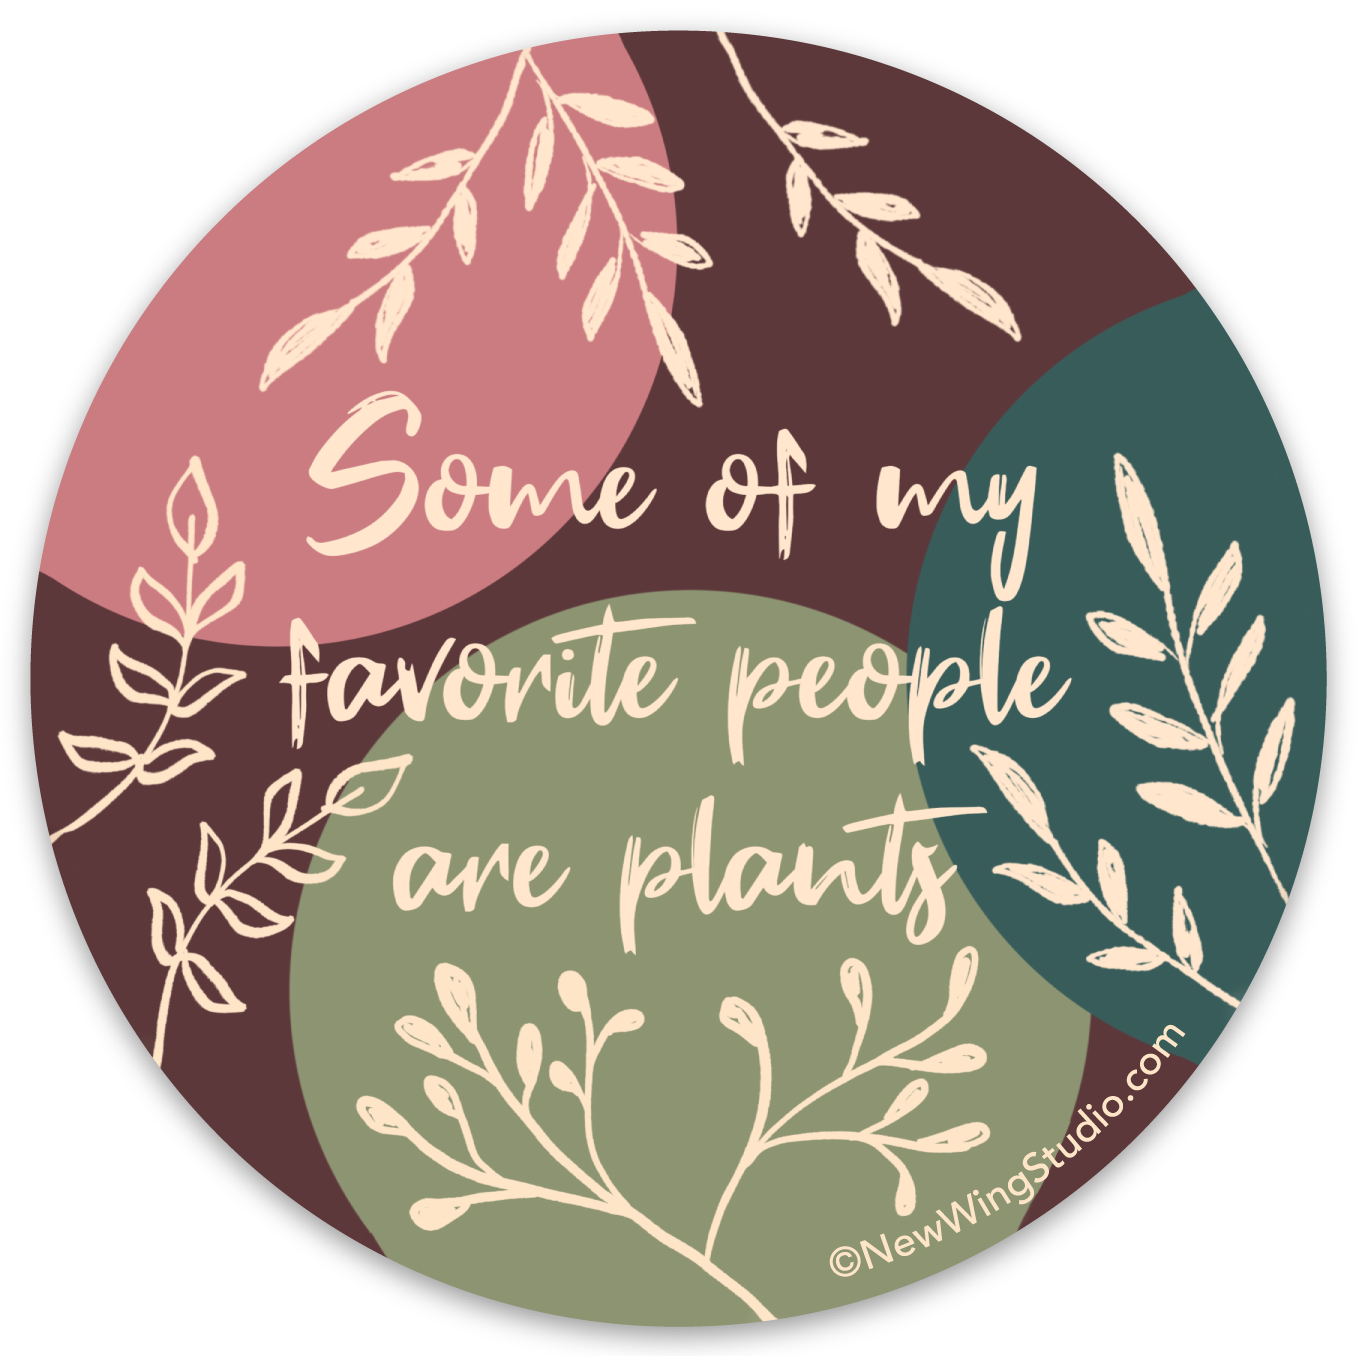 This is an image of New Wing Studio's sticker, "Some of My Favorite People are Plants." It features beautiful pink, teal, green, and red/brown colors with cream leaf designs and the text, "Some of my favorite people are plants." The sticker is perfect for those who love plants, those who love to garden, those who love flowers, or growing anything botanical. It is also great for those who have house plants. Newwingstudio.com